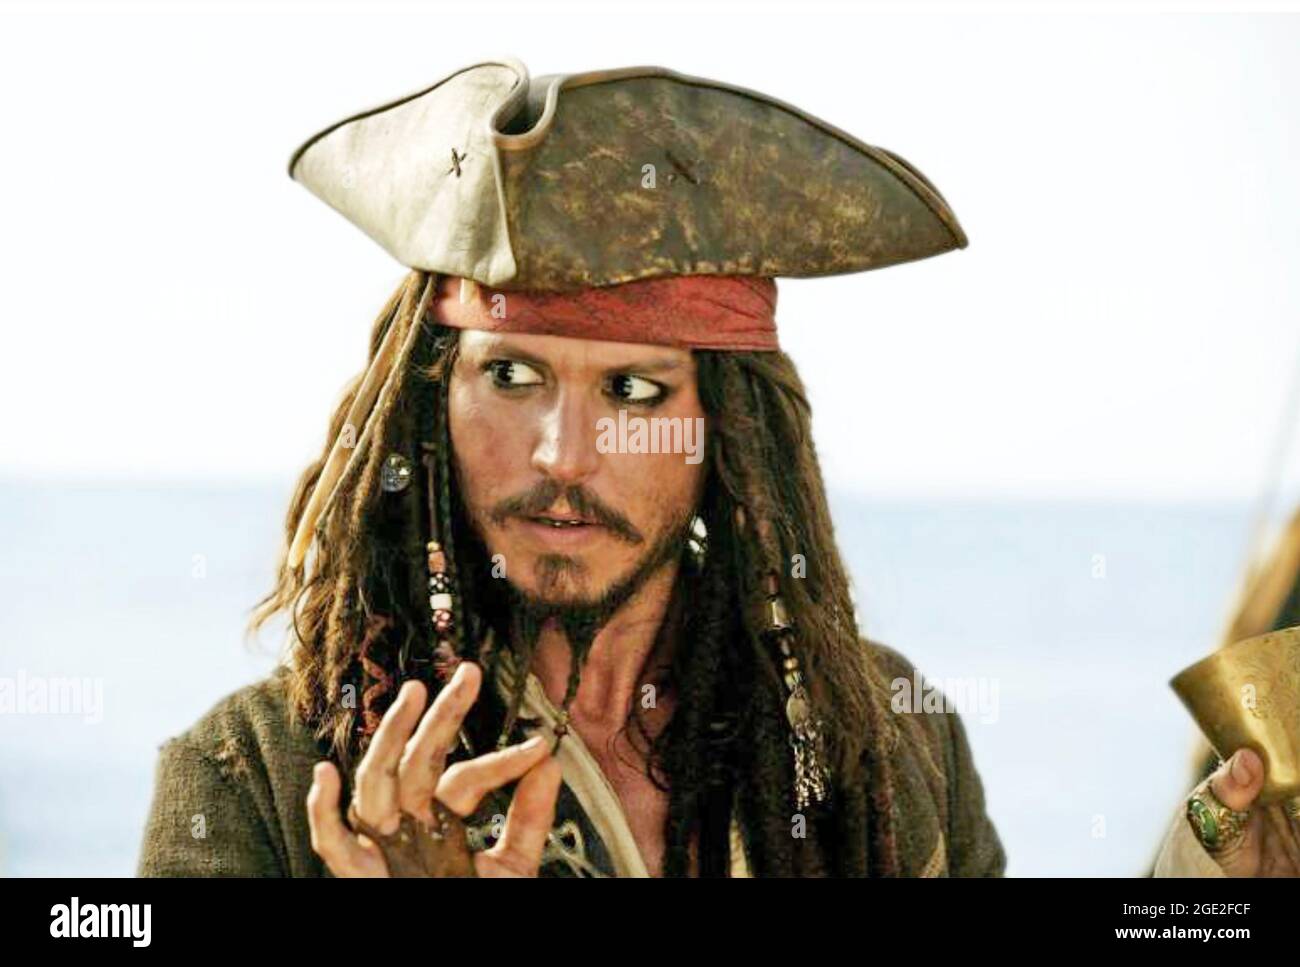 PIRATES OF THE CARIBBEAN: DEAD MAN'S CHEST 2006 Buena Vista Pictures film with Johnny Depp Stock Photo